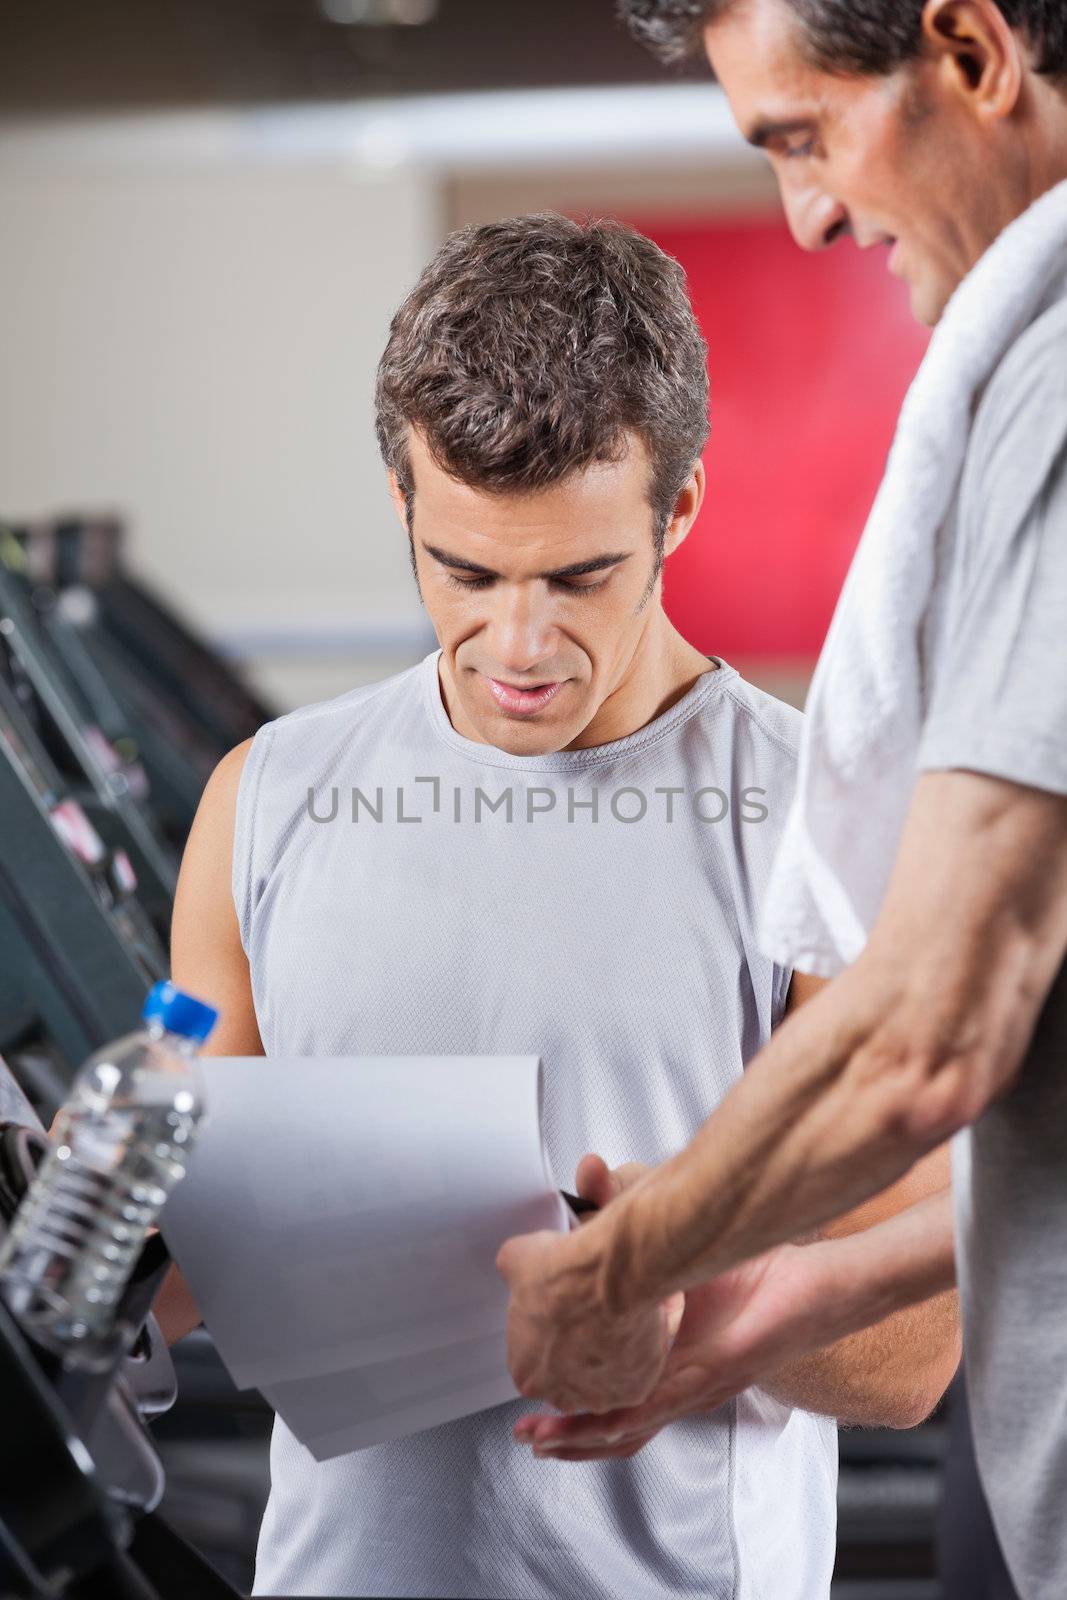 Male instructor making notes on clipboard in health club